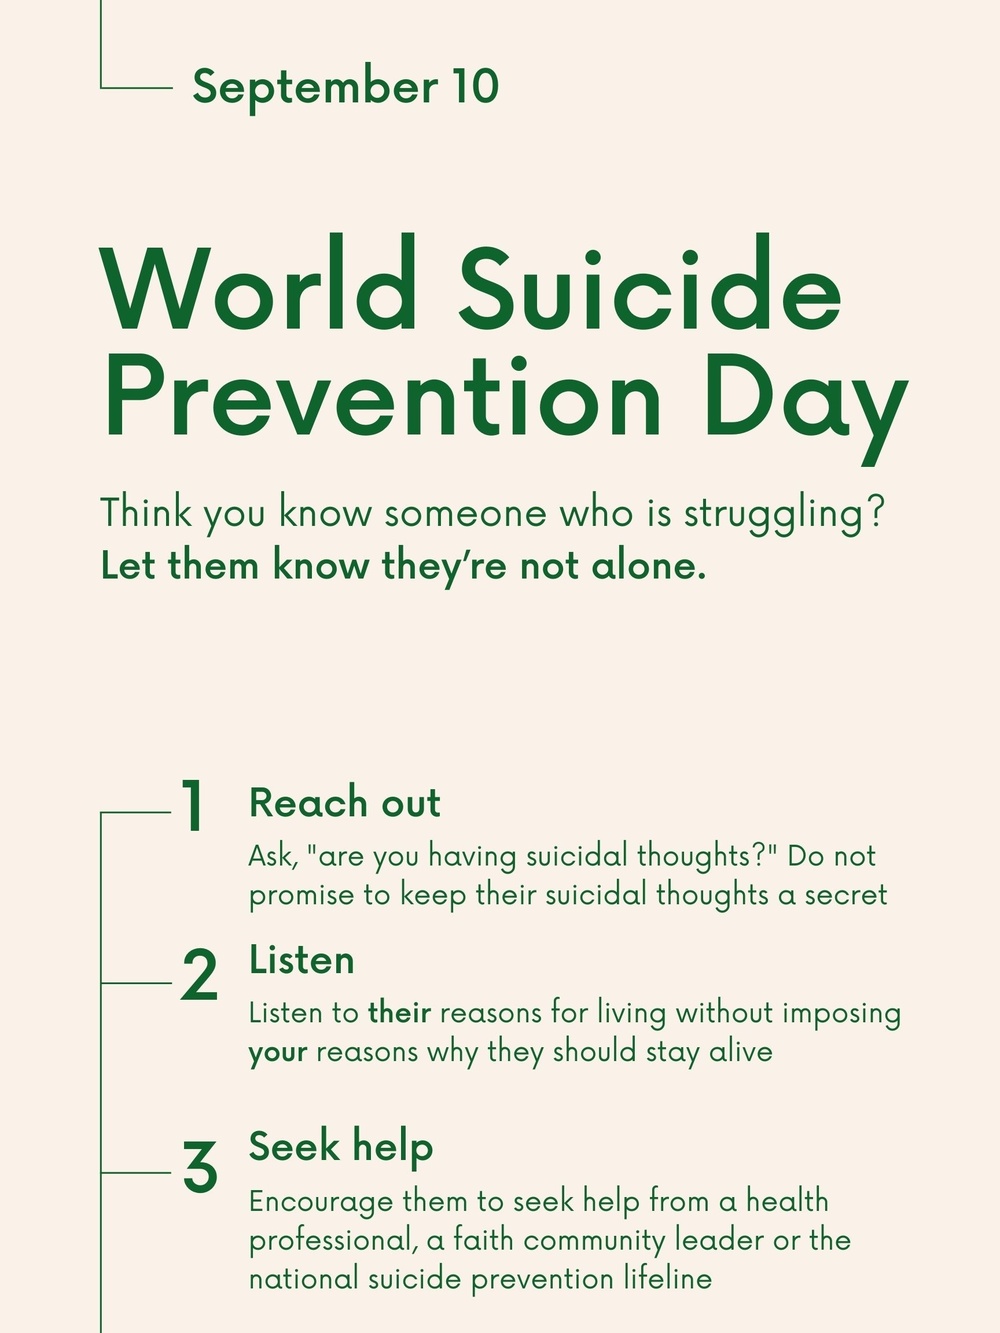 World Suicide Prevention Day Poster